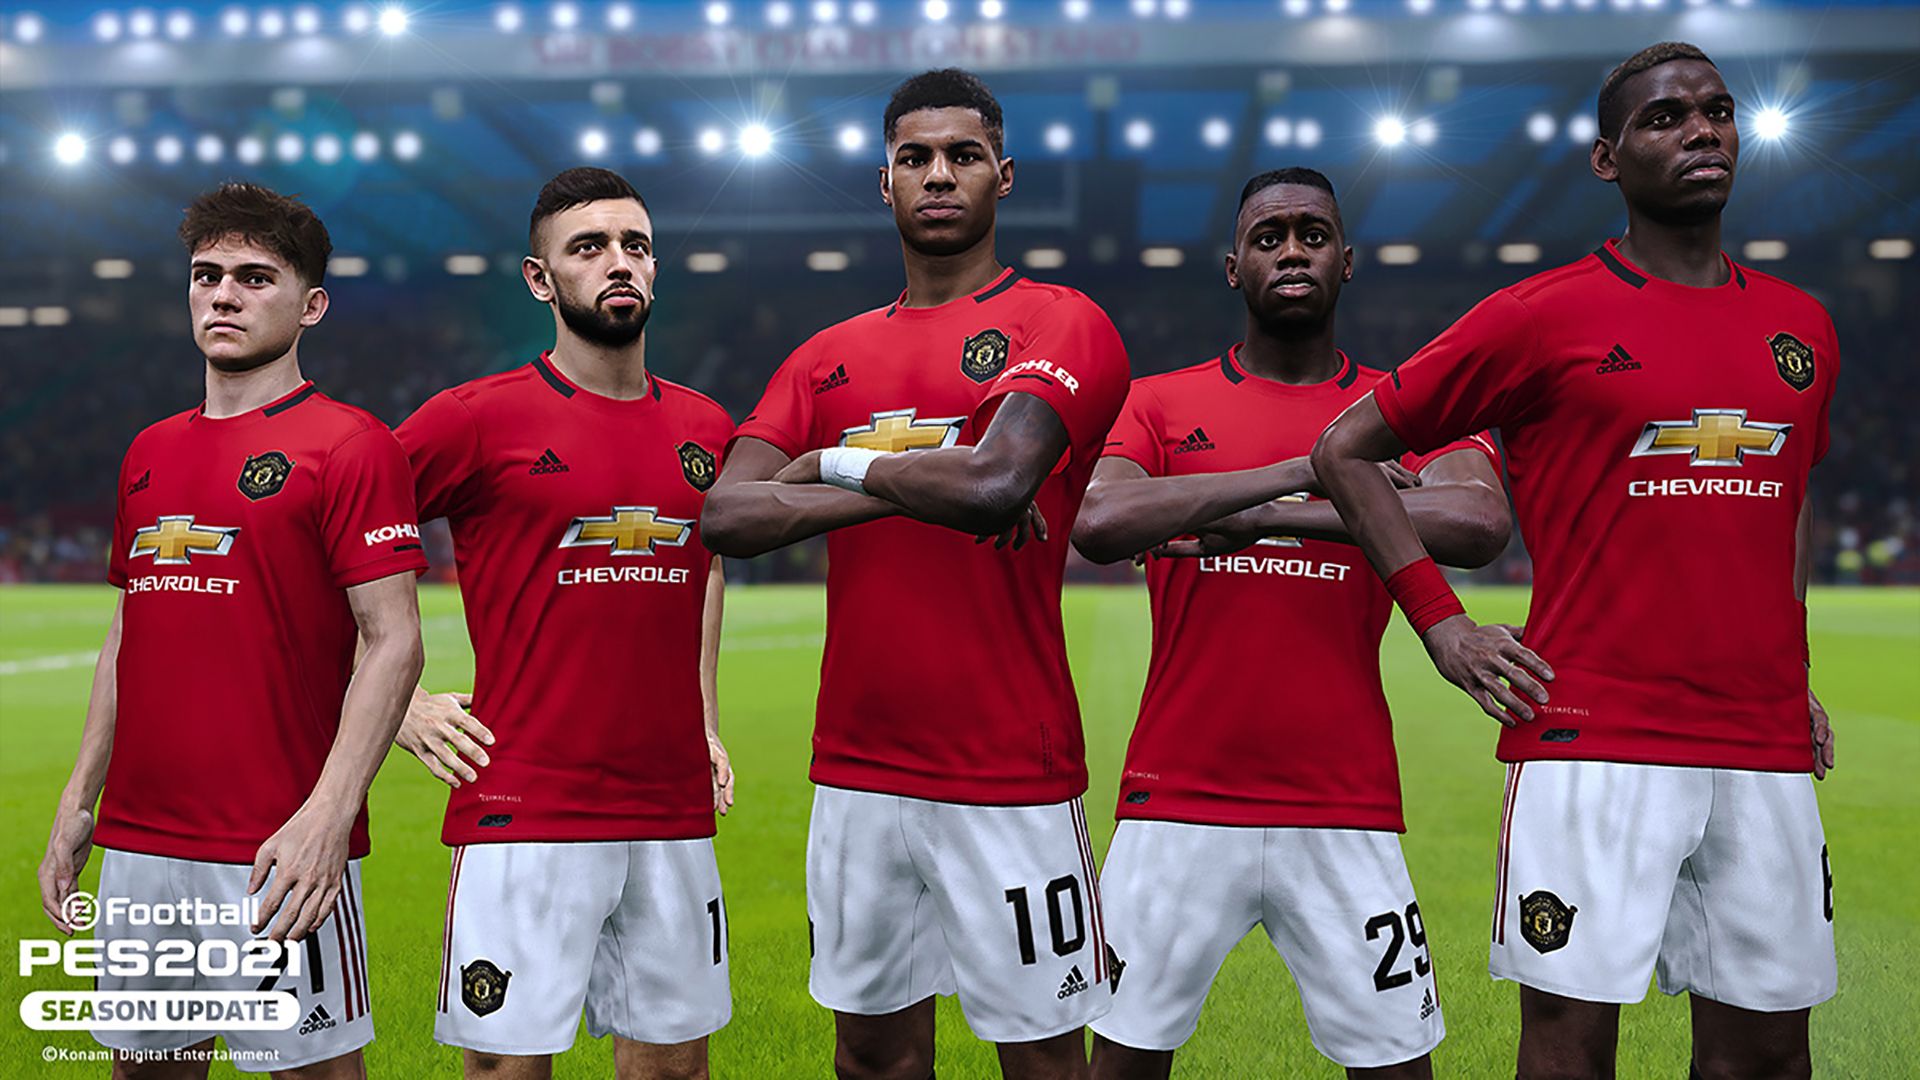 PES 2021: Release Dates, Price, Club Licences, New Features And Next Gen News